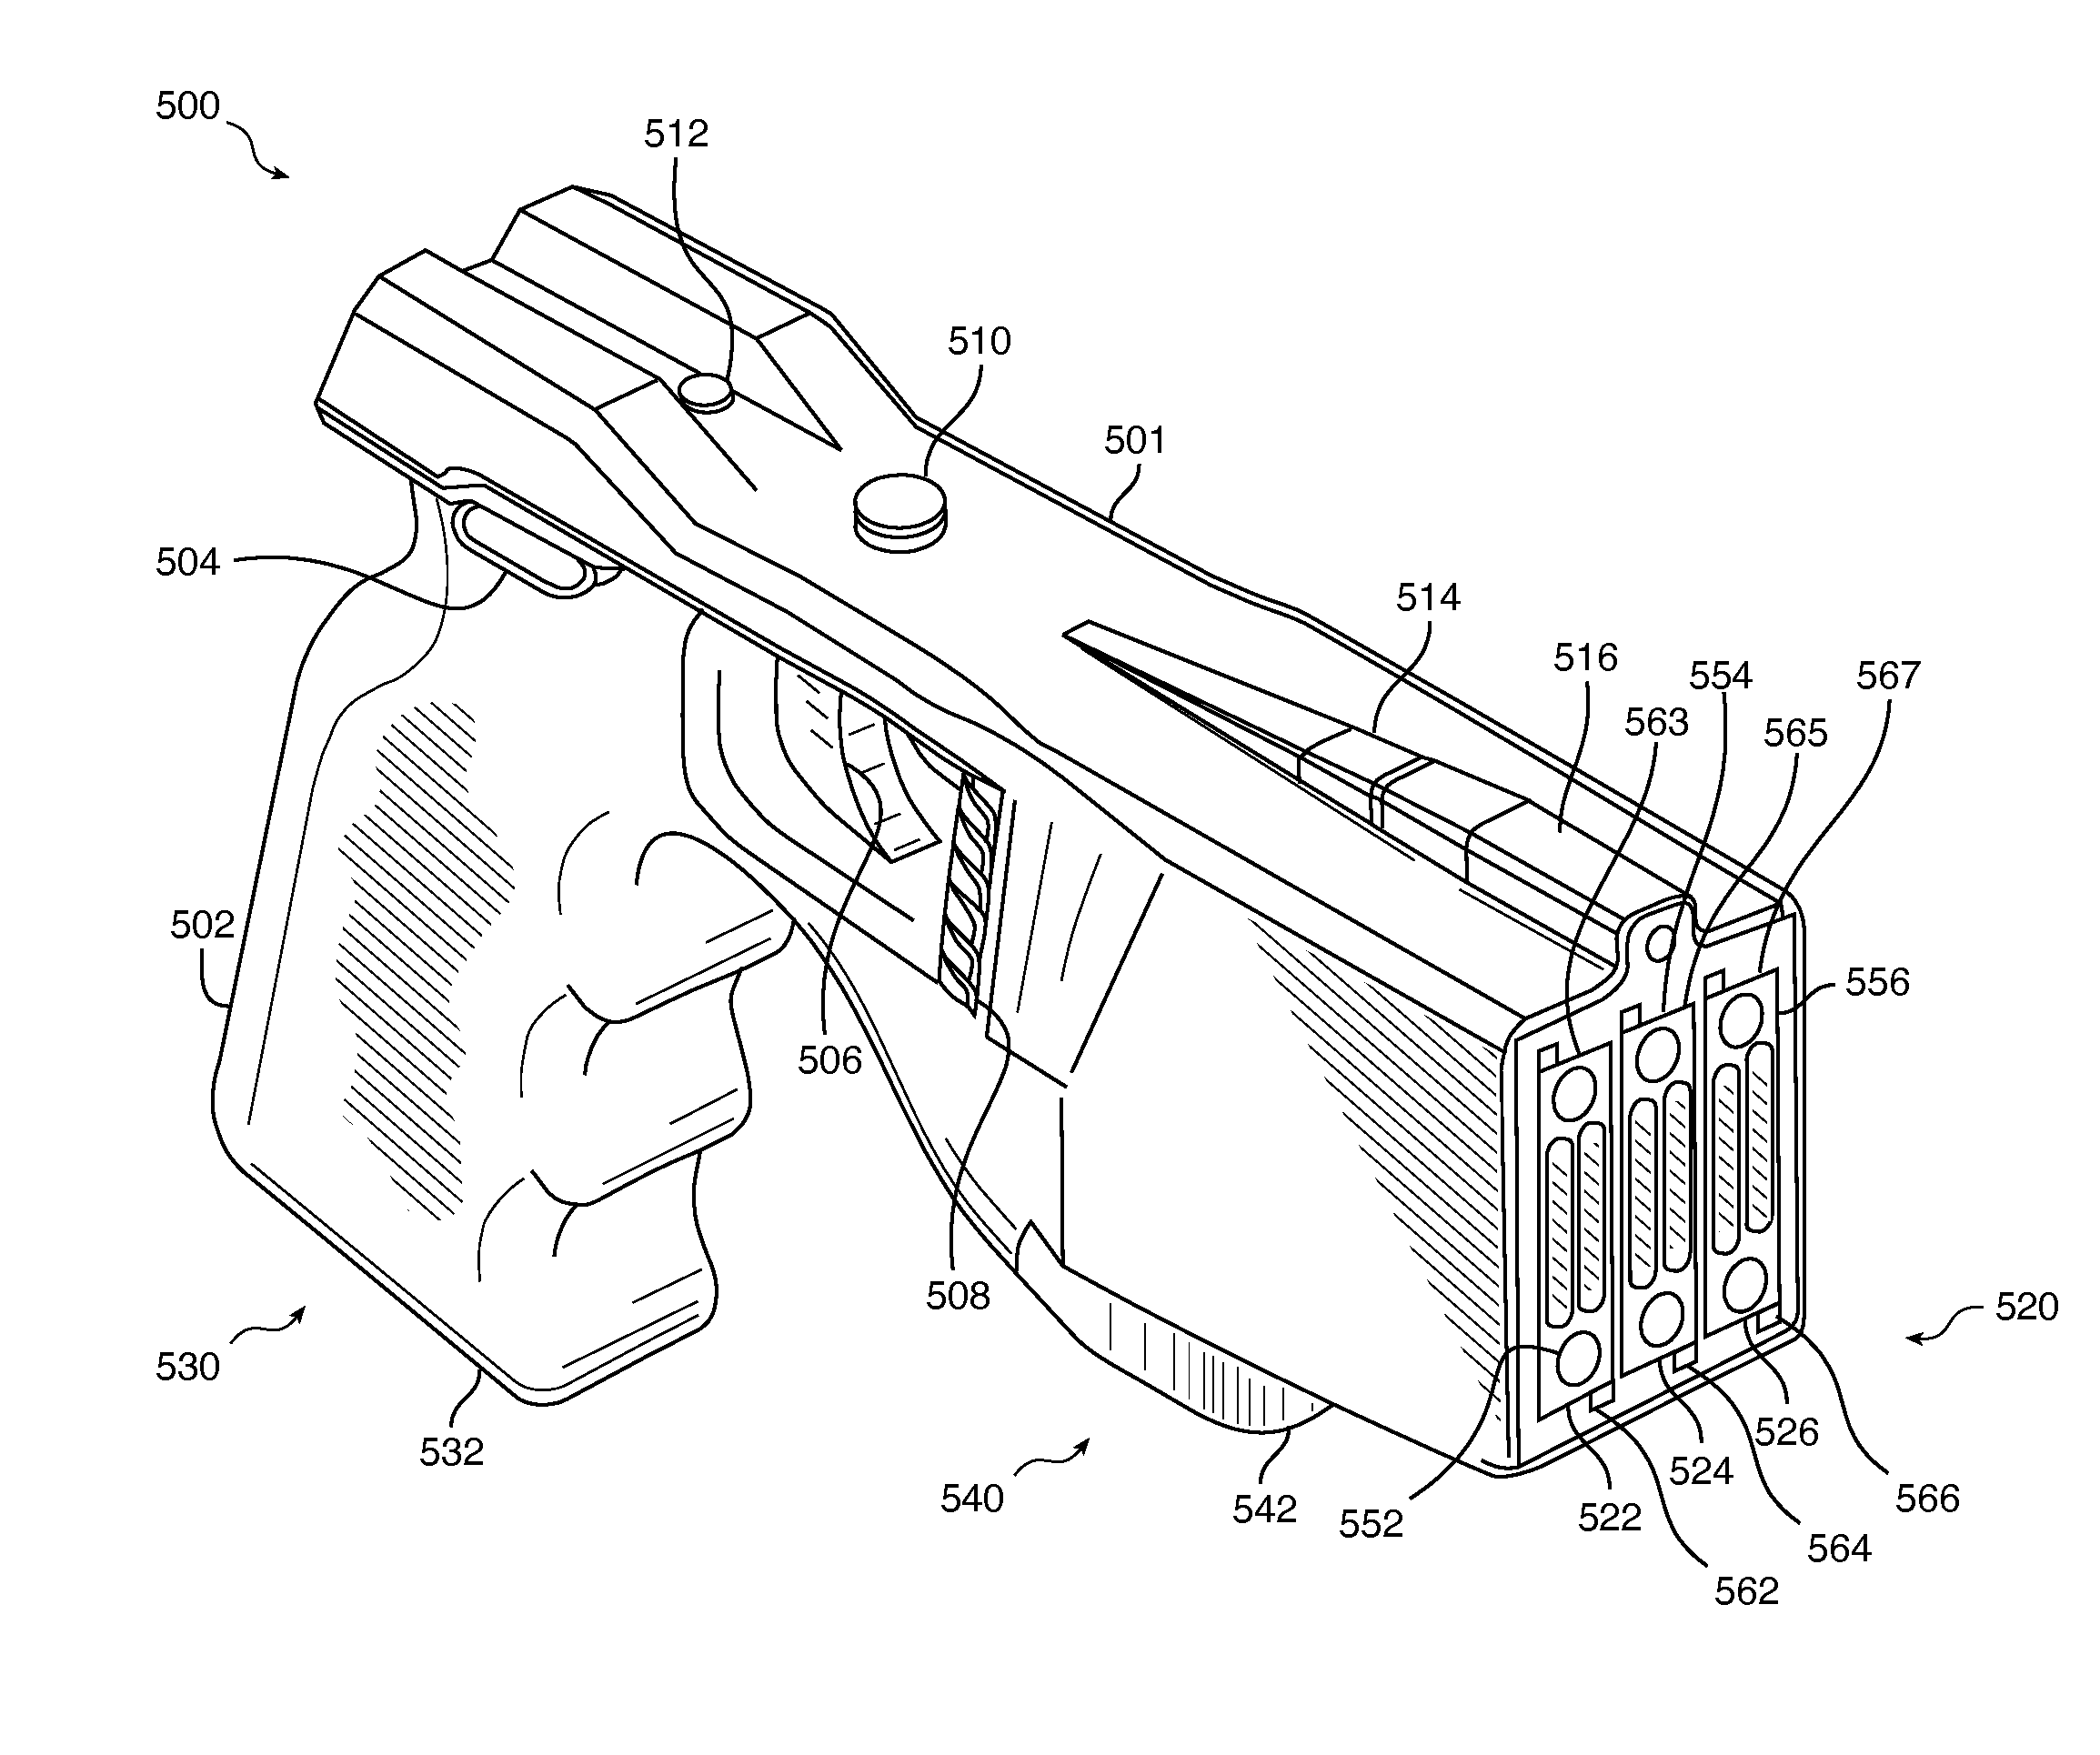 Systems and methods for a user interface for electronic weaponry